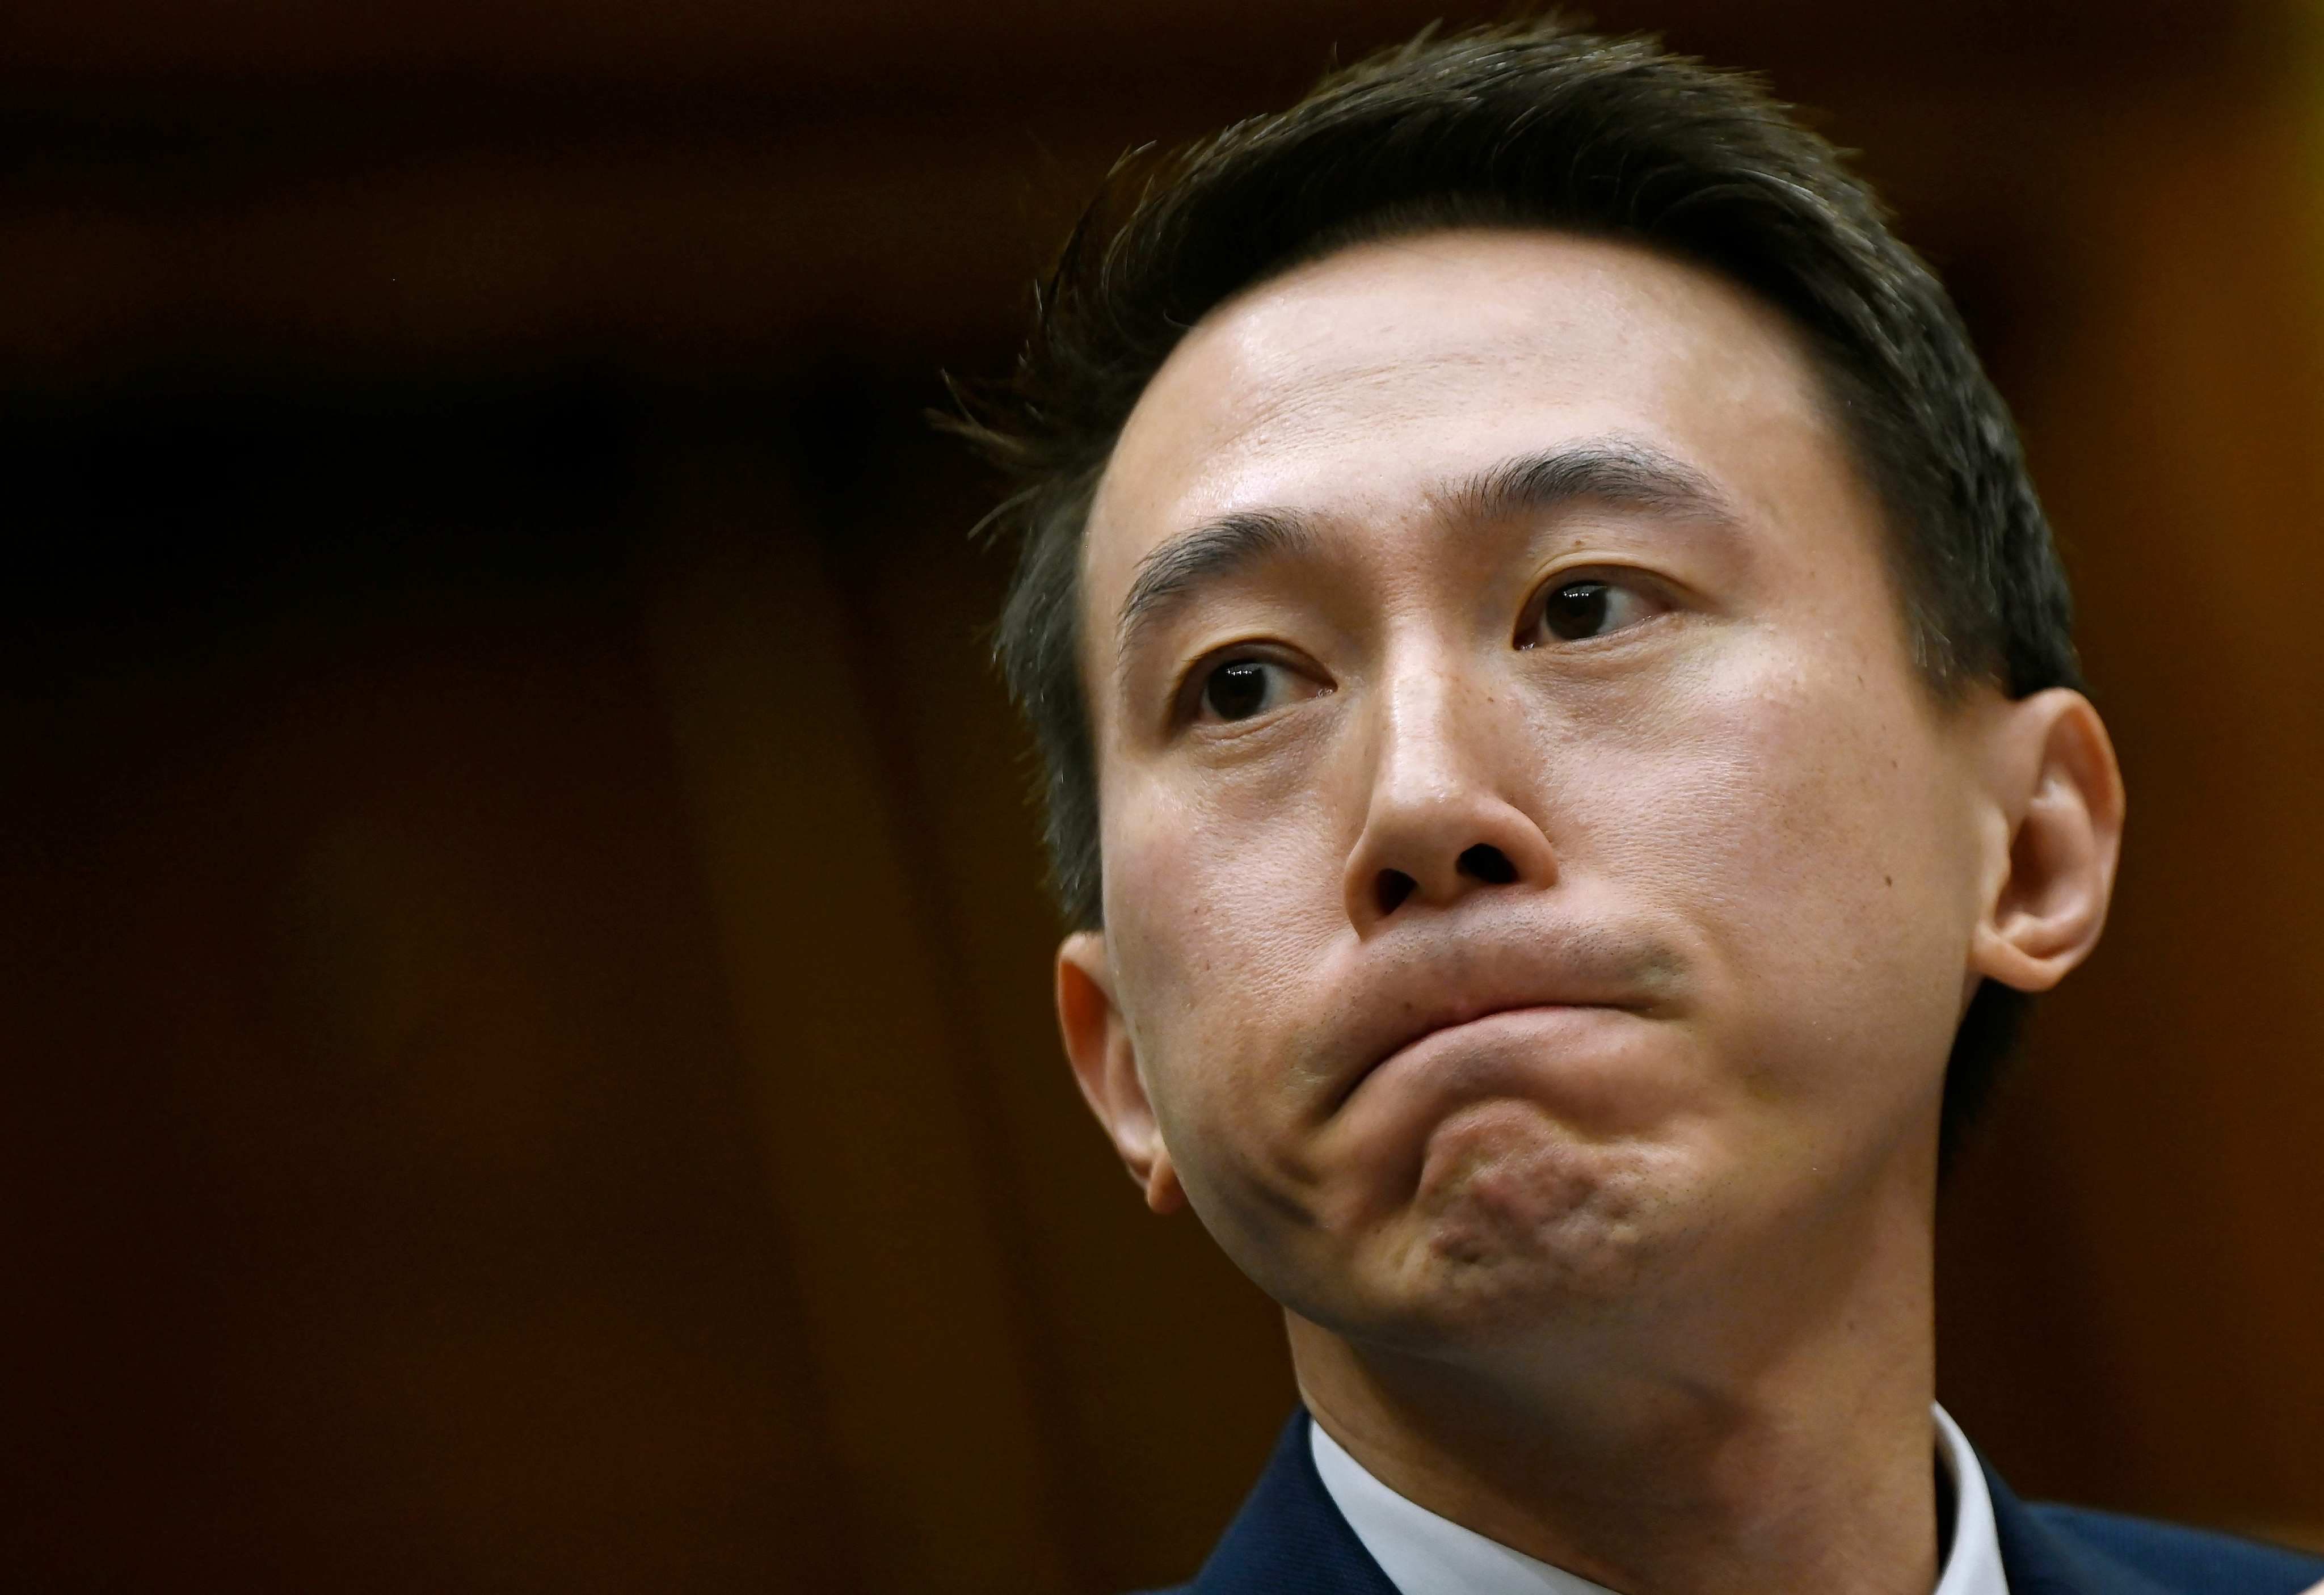 TikTok CEO Shou Zi Chew listens during his testifmony before the House Energy and Commerce Committee hearing on “TikTok: How Congress Can Safeguard American Data Privacy and Protect Children from Online Harms” on Capitol Hill, US, on March 23, 2023. Photo: AFP